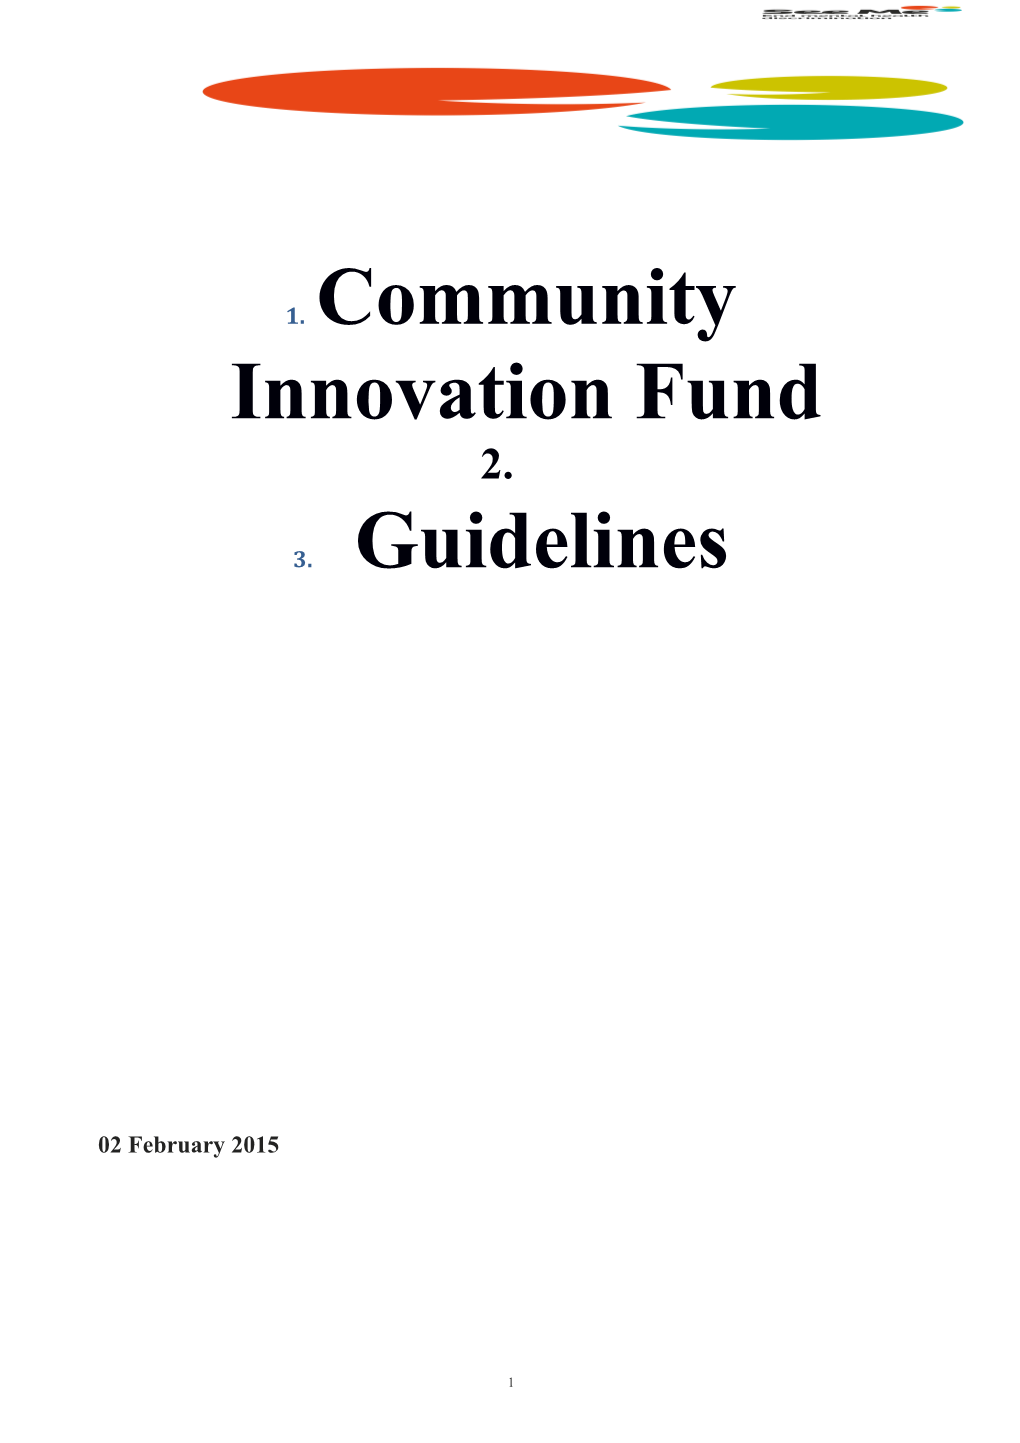 Community Innovation Fund - Guidance Notes